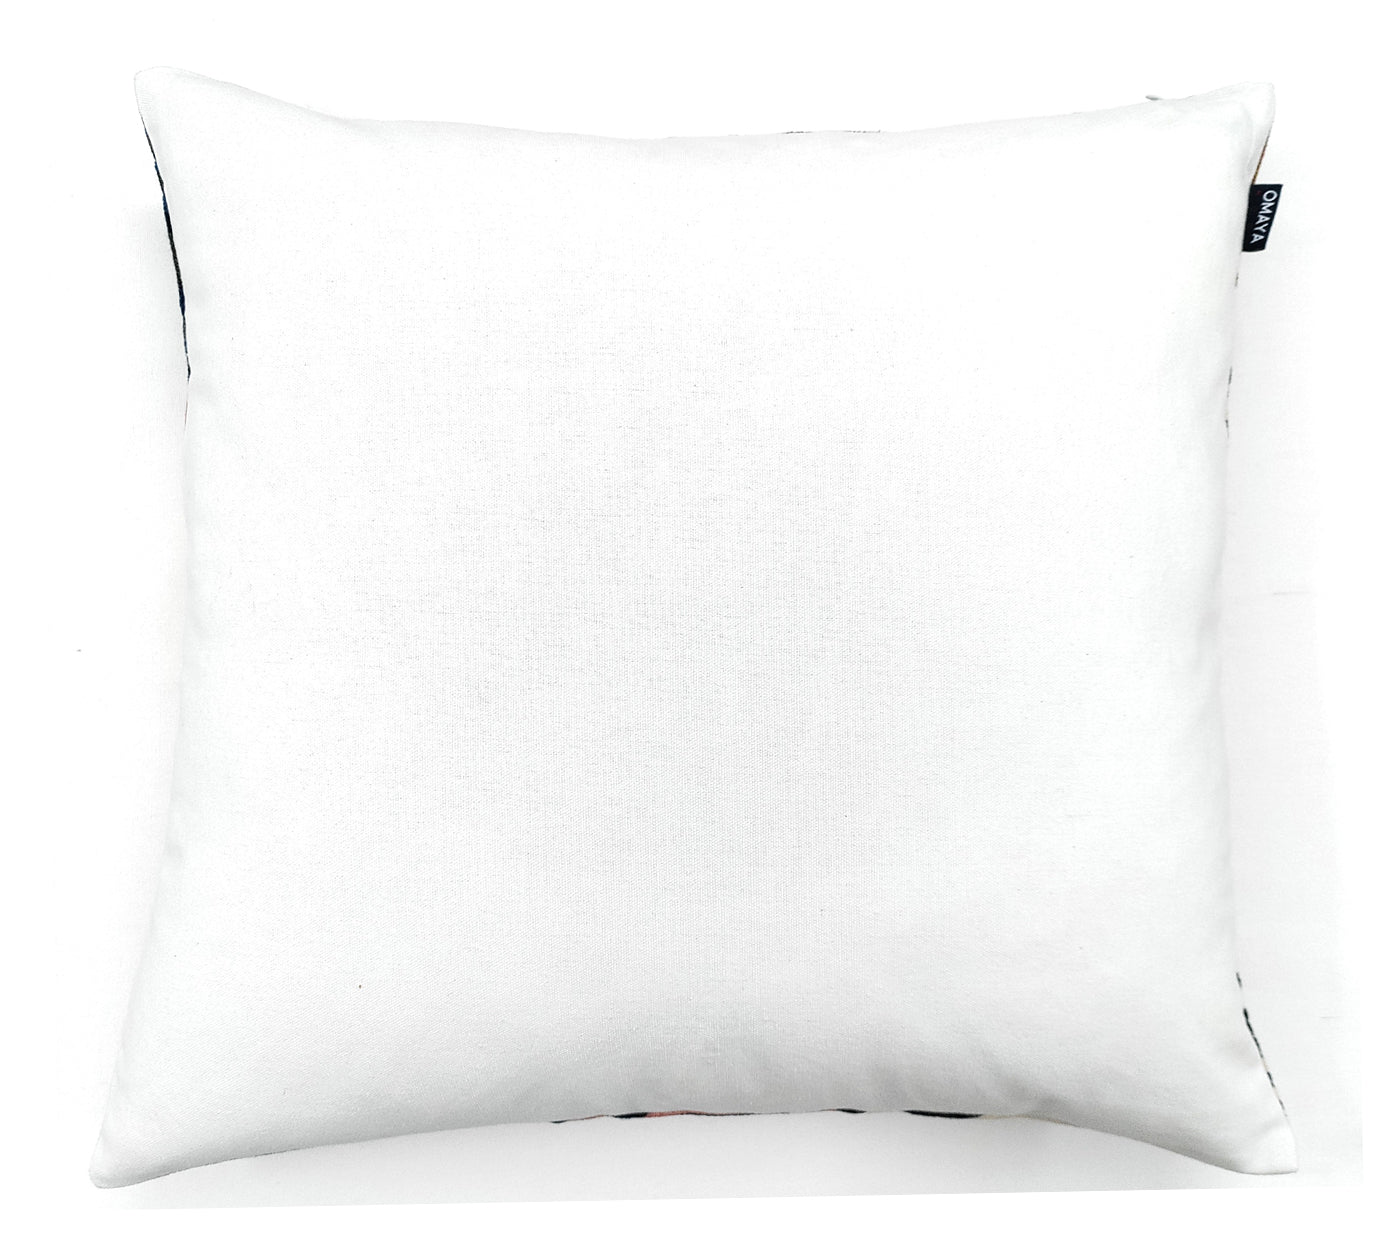 Artistic Printed Embroidered Cushion Cover Size 50X50Cms